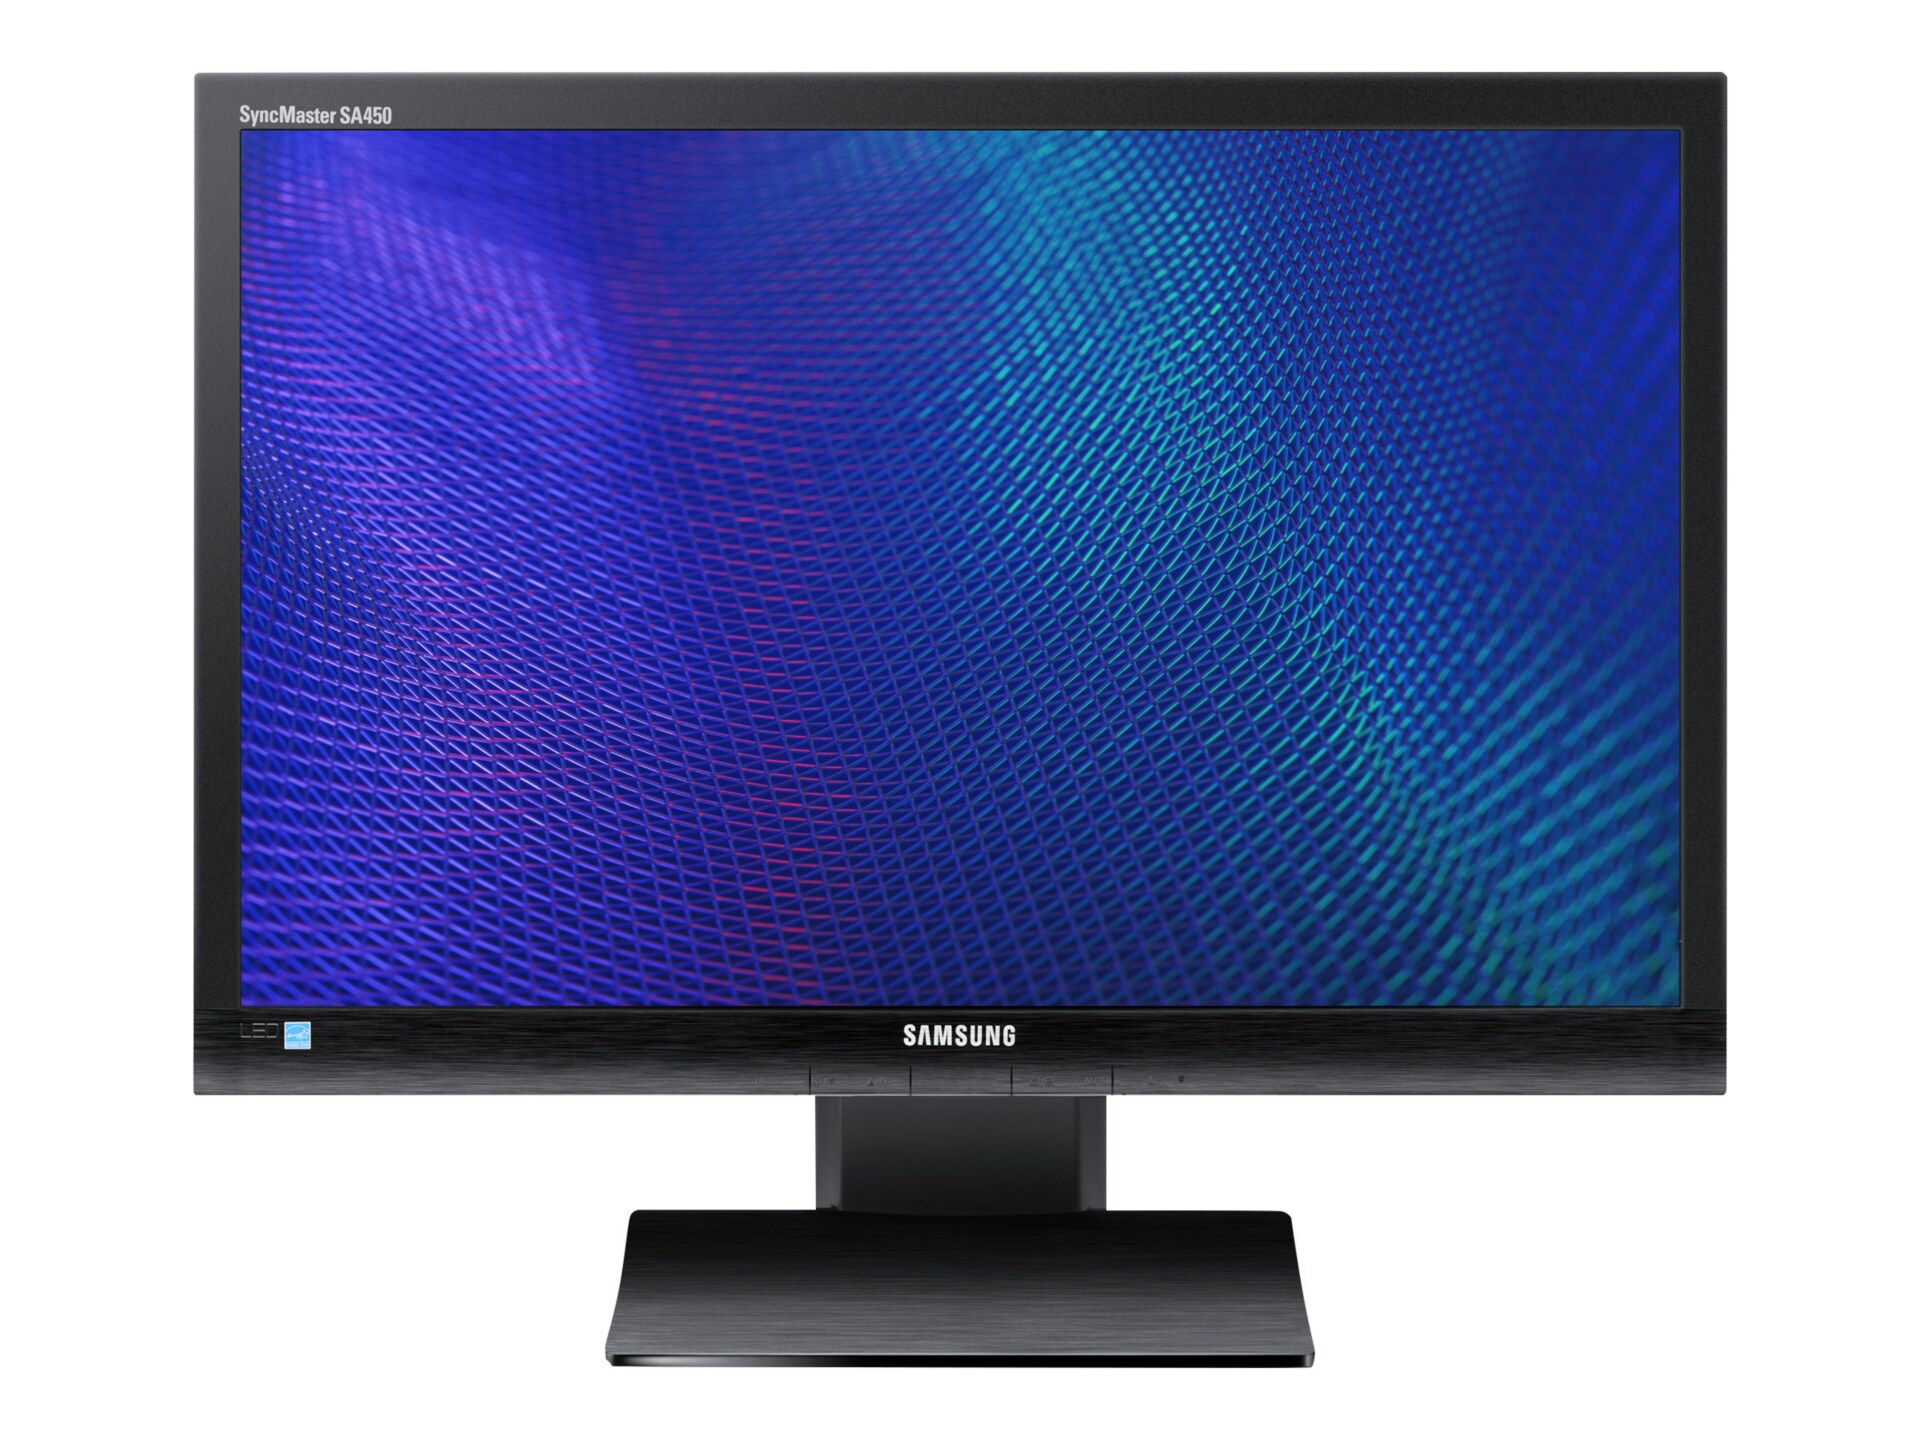 Samsung S24A450BW 24" Wide LED